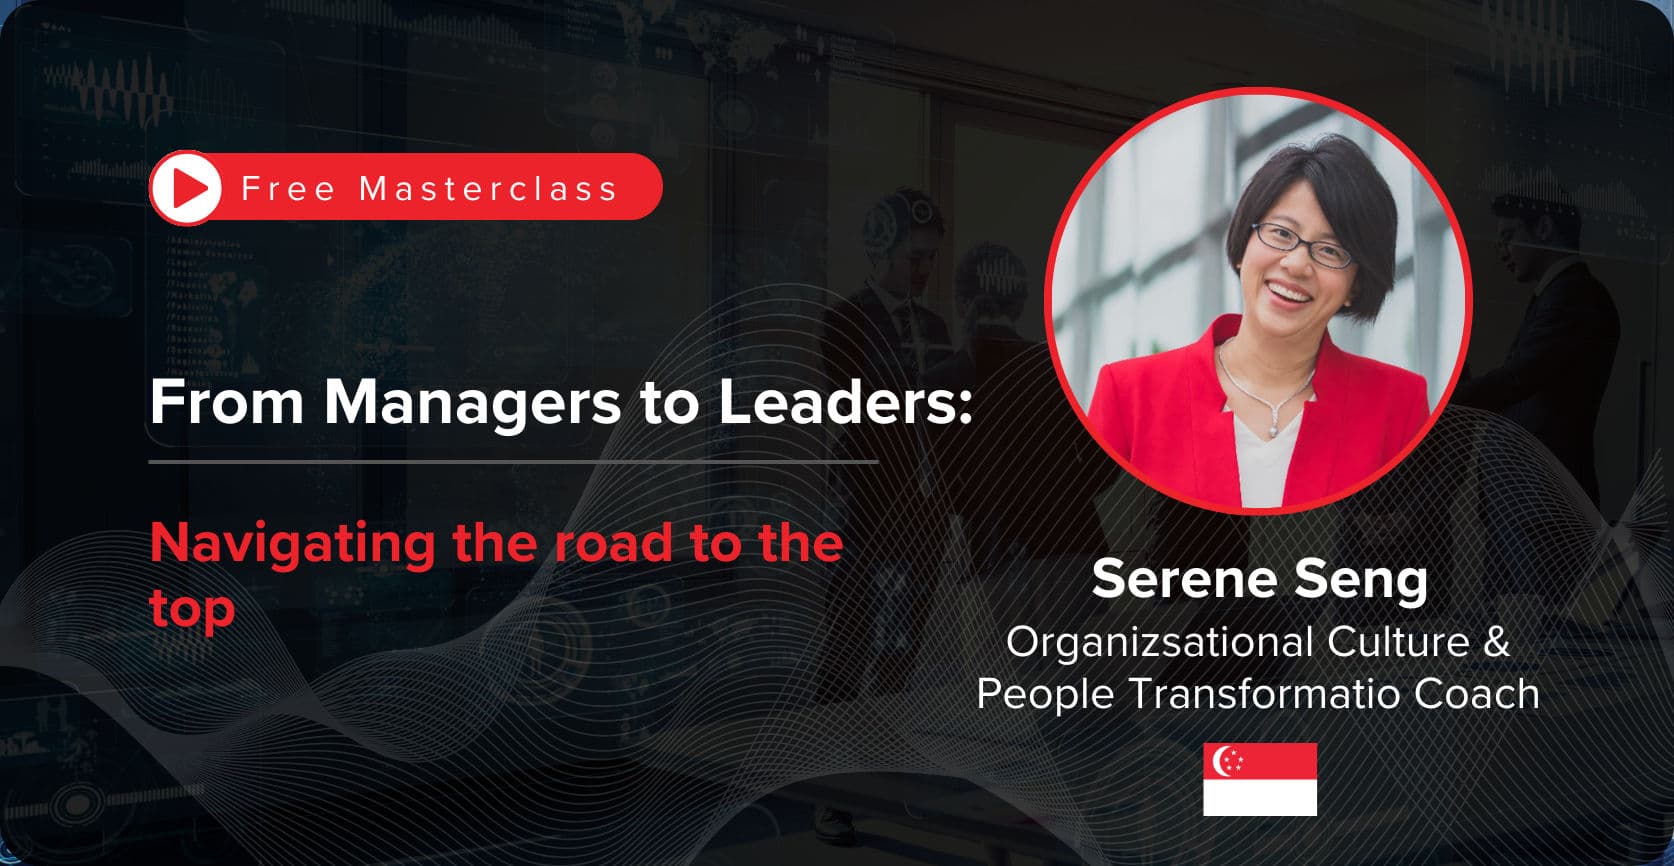 From Managers to Leaders: Sereng Sen